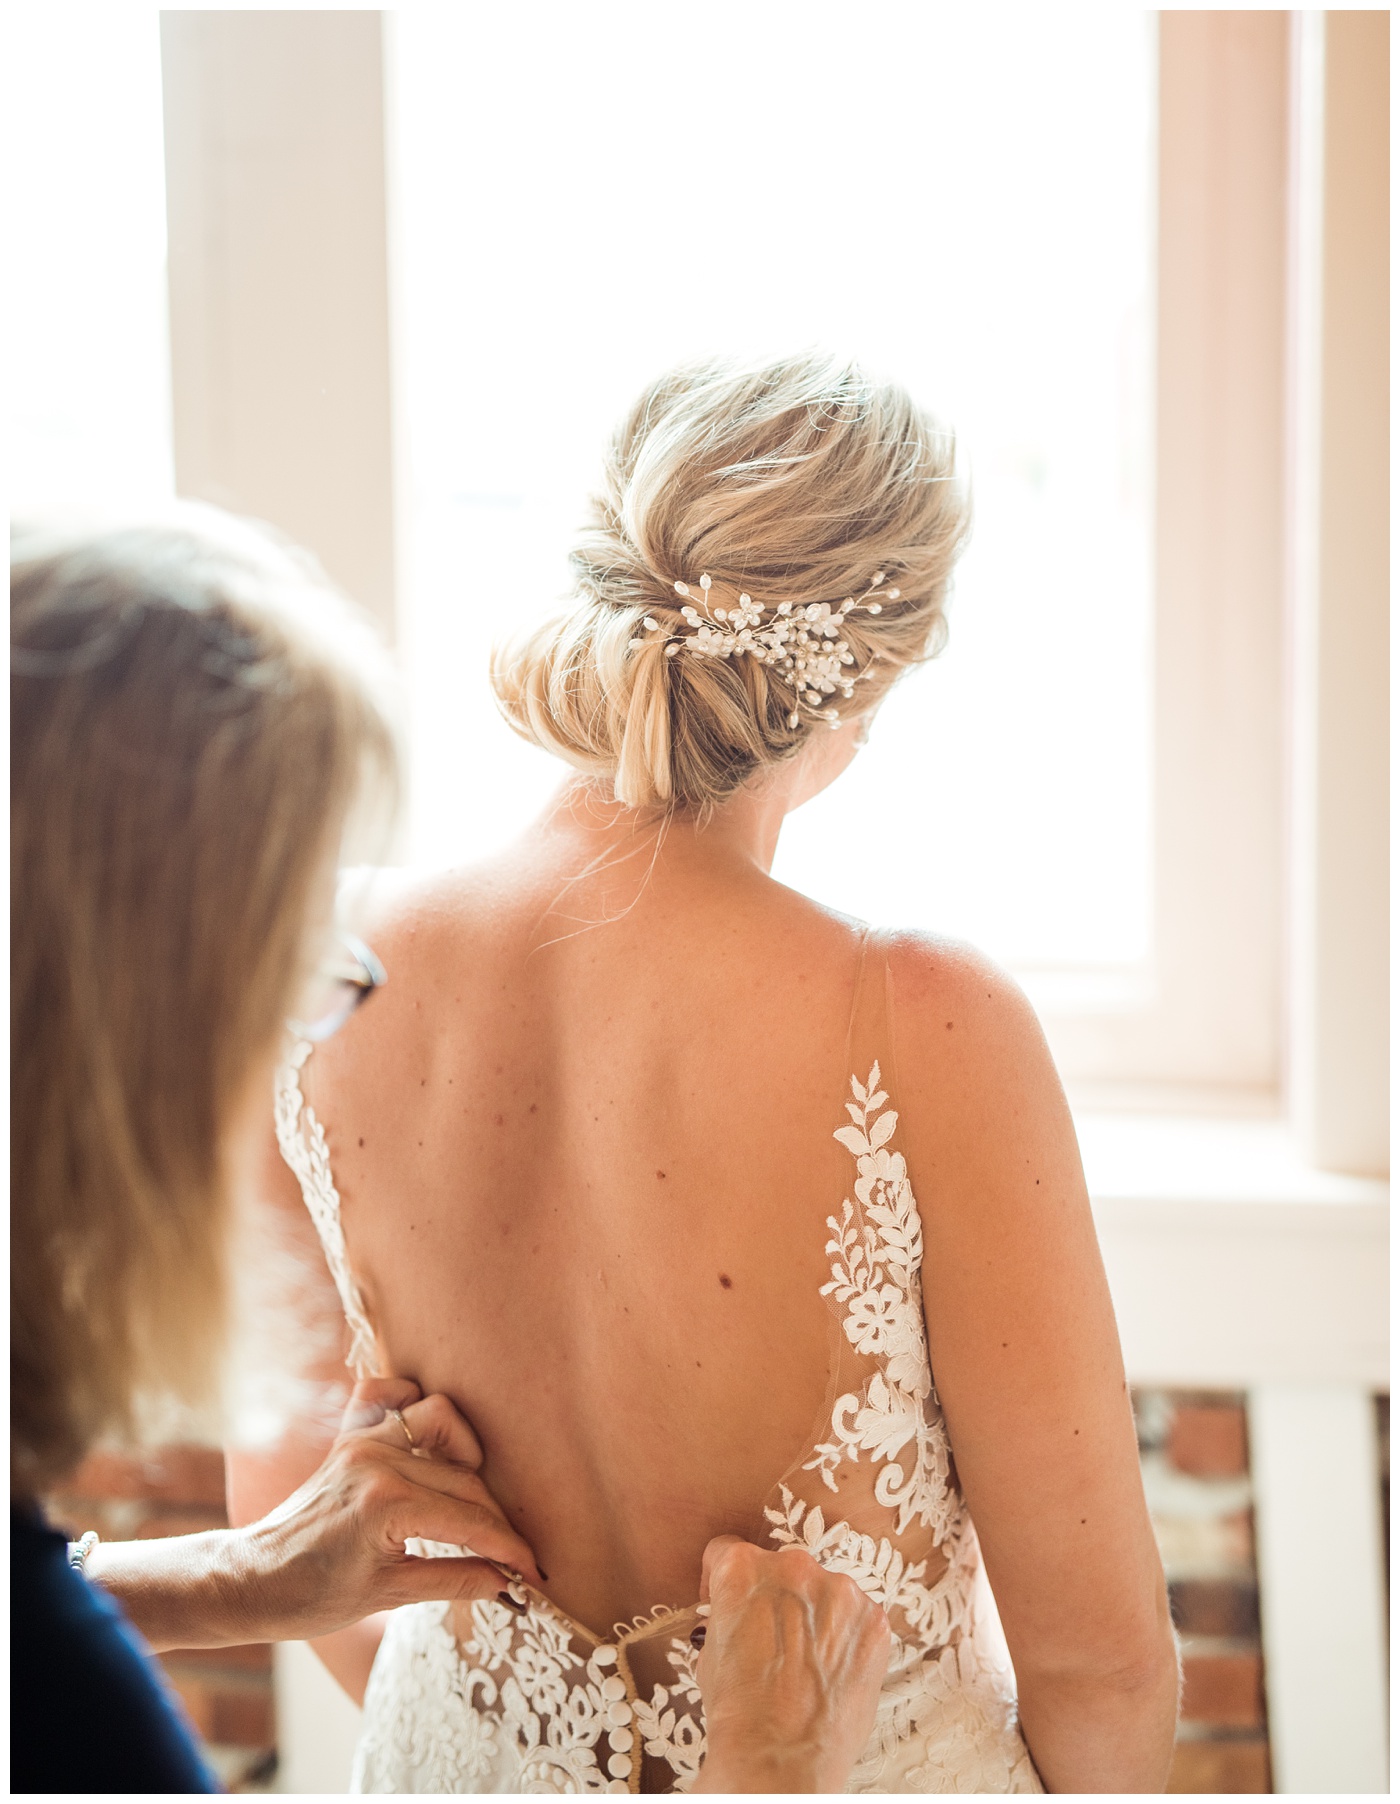 Bridal details in the getting ready suite